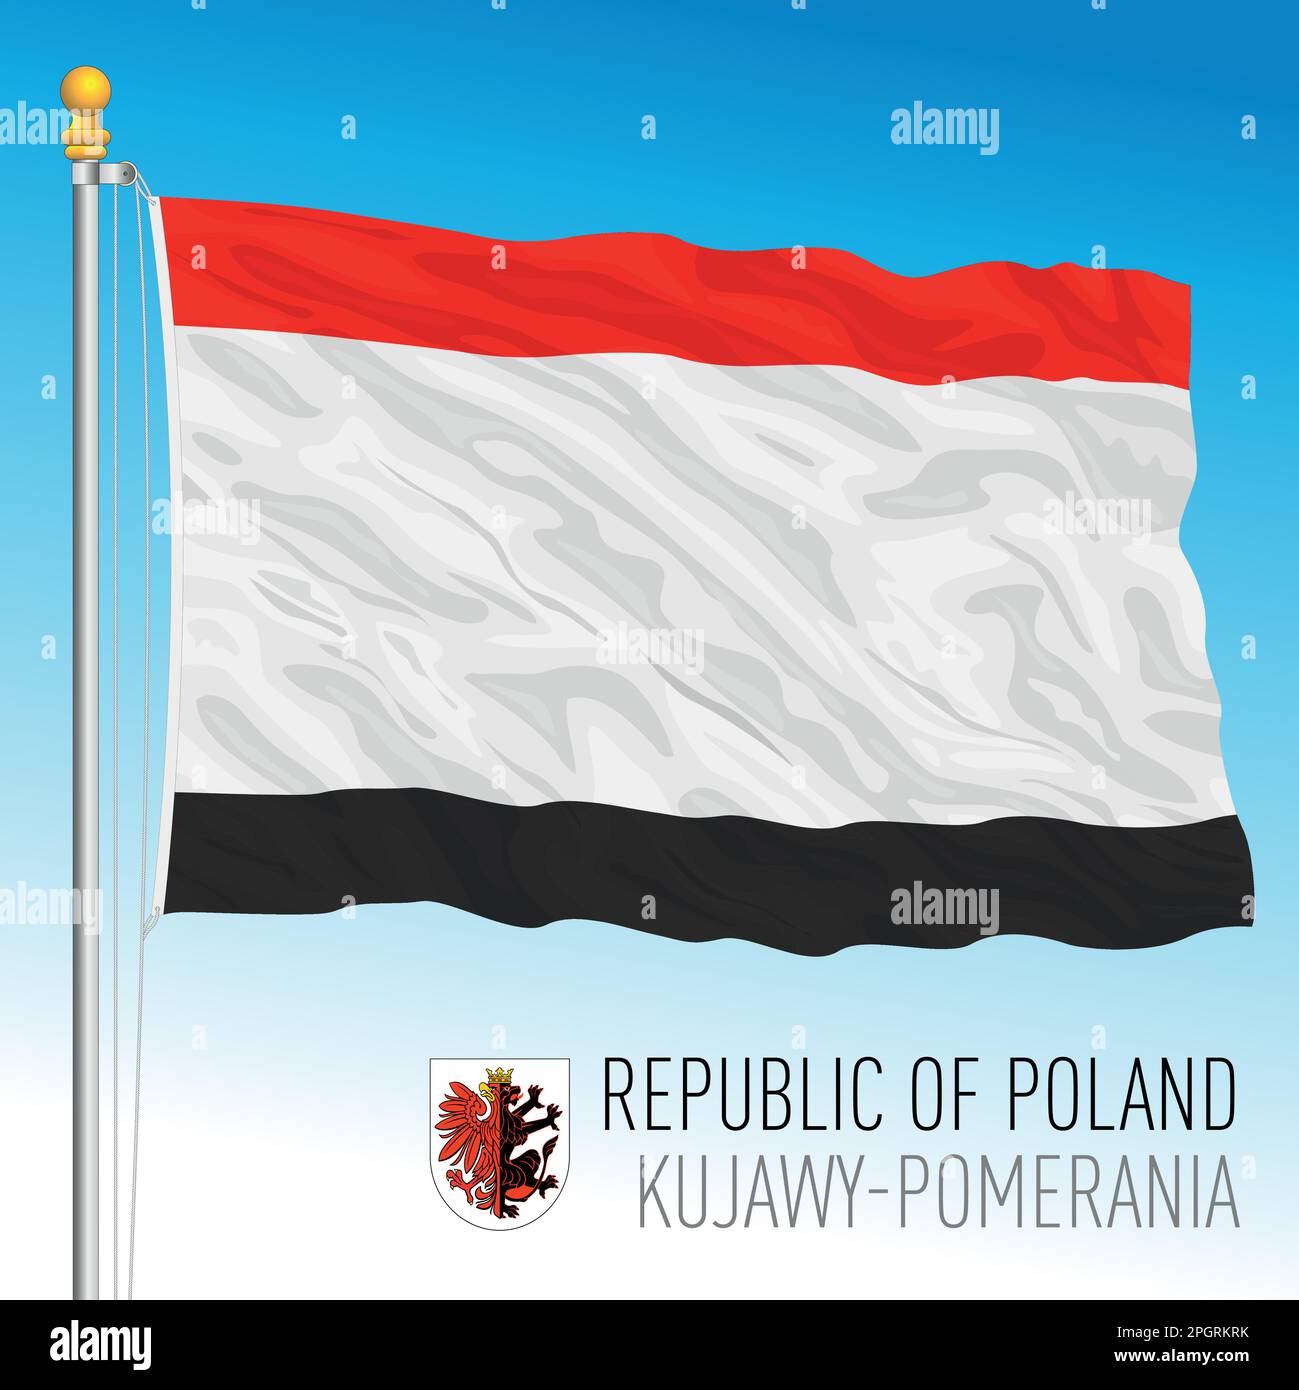 Kujawy - Pomerania regional flag and coat of arms, Republic of Poland, european country, vector illustration Stock Vector